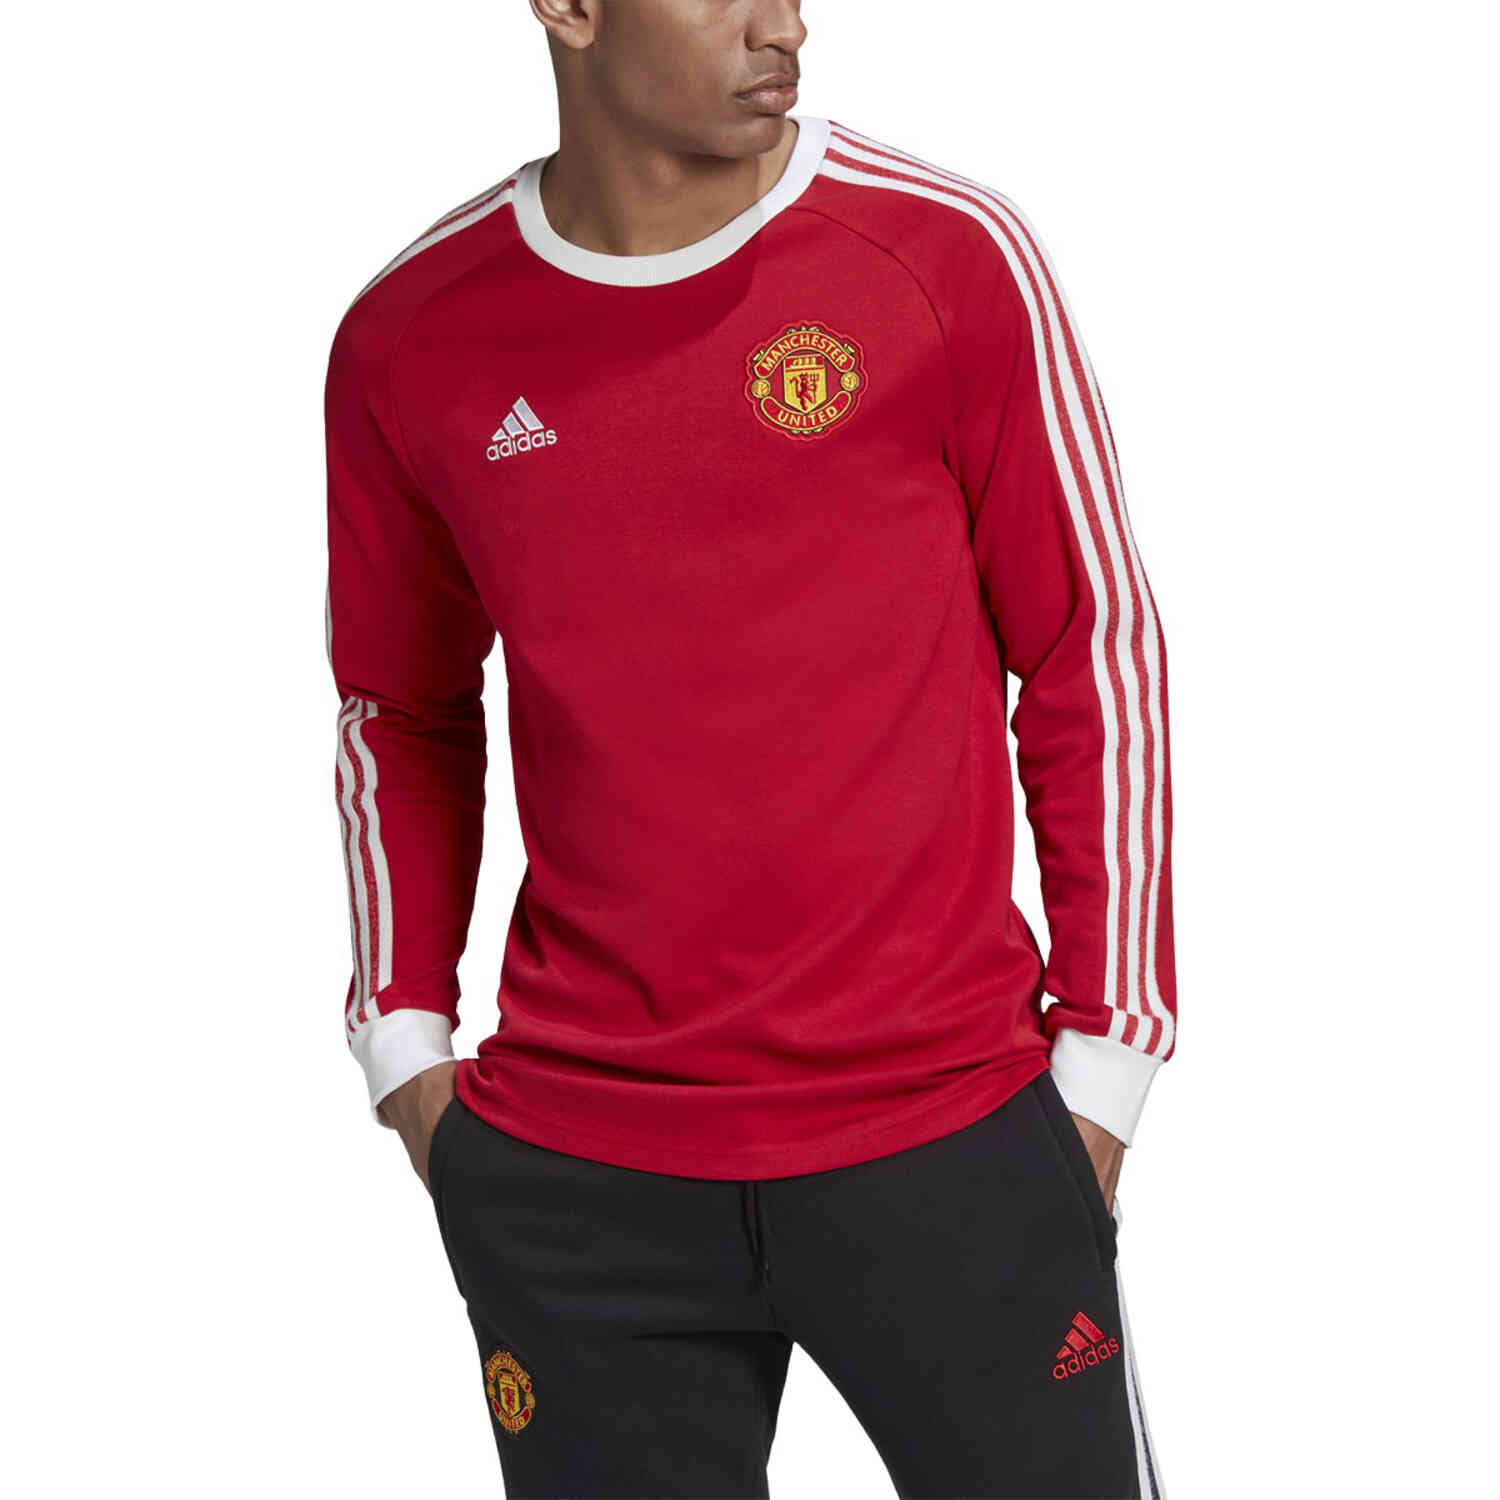 adidas Manchester United Icons Tee - Real Red - SoccerPro